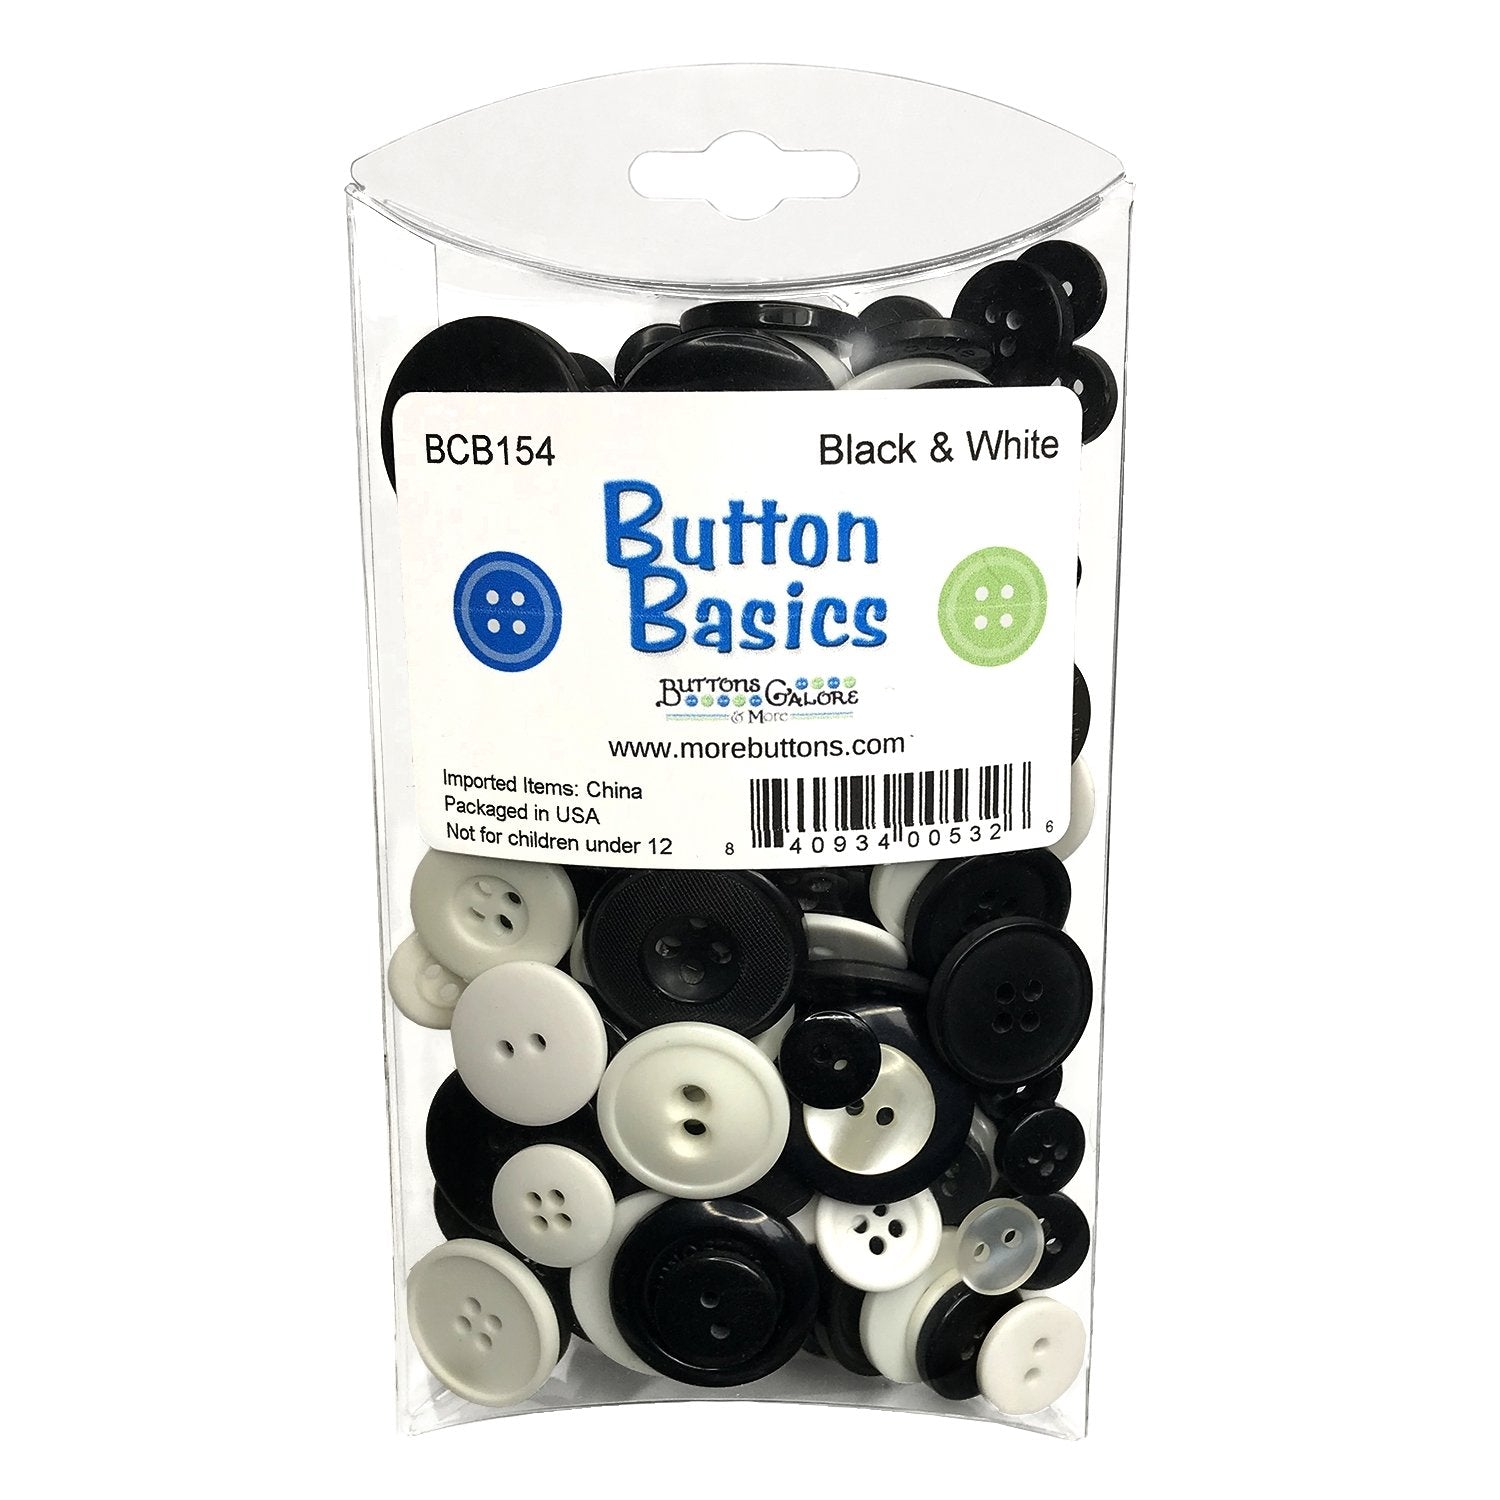  Pack of 12 Black Sewing Buttons 0.70 inch Crafts